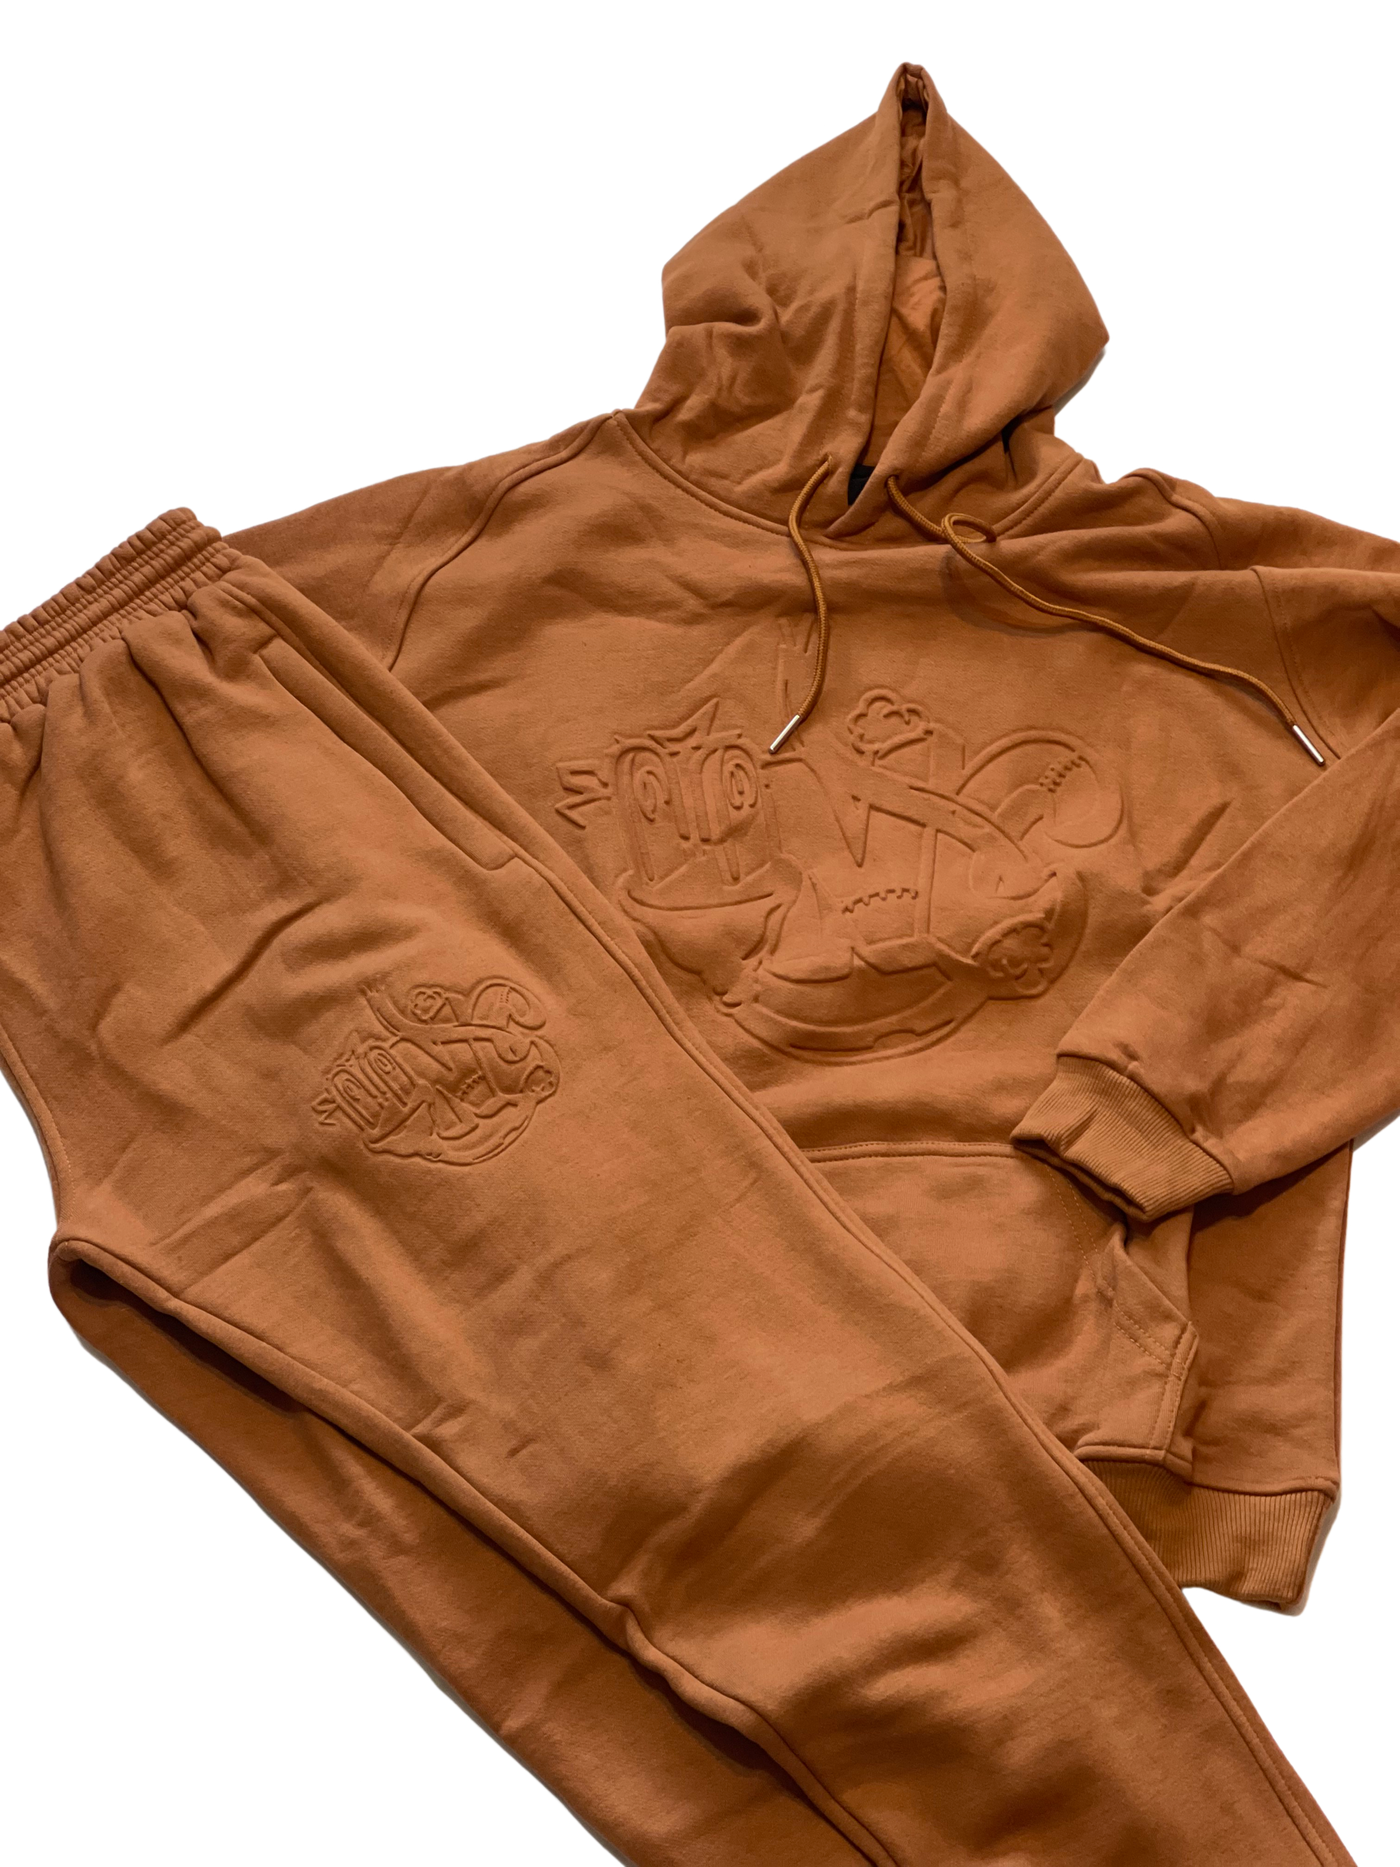 UNC PLUGGED IN EMBOSSED JOGGER SUIT (brown) - Unique Sweatsuits, hats, tees, shorts, hoodies, Outwear & accessories online | Uneekly Nsane